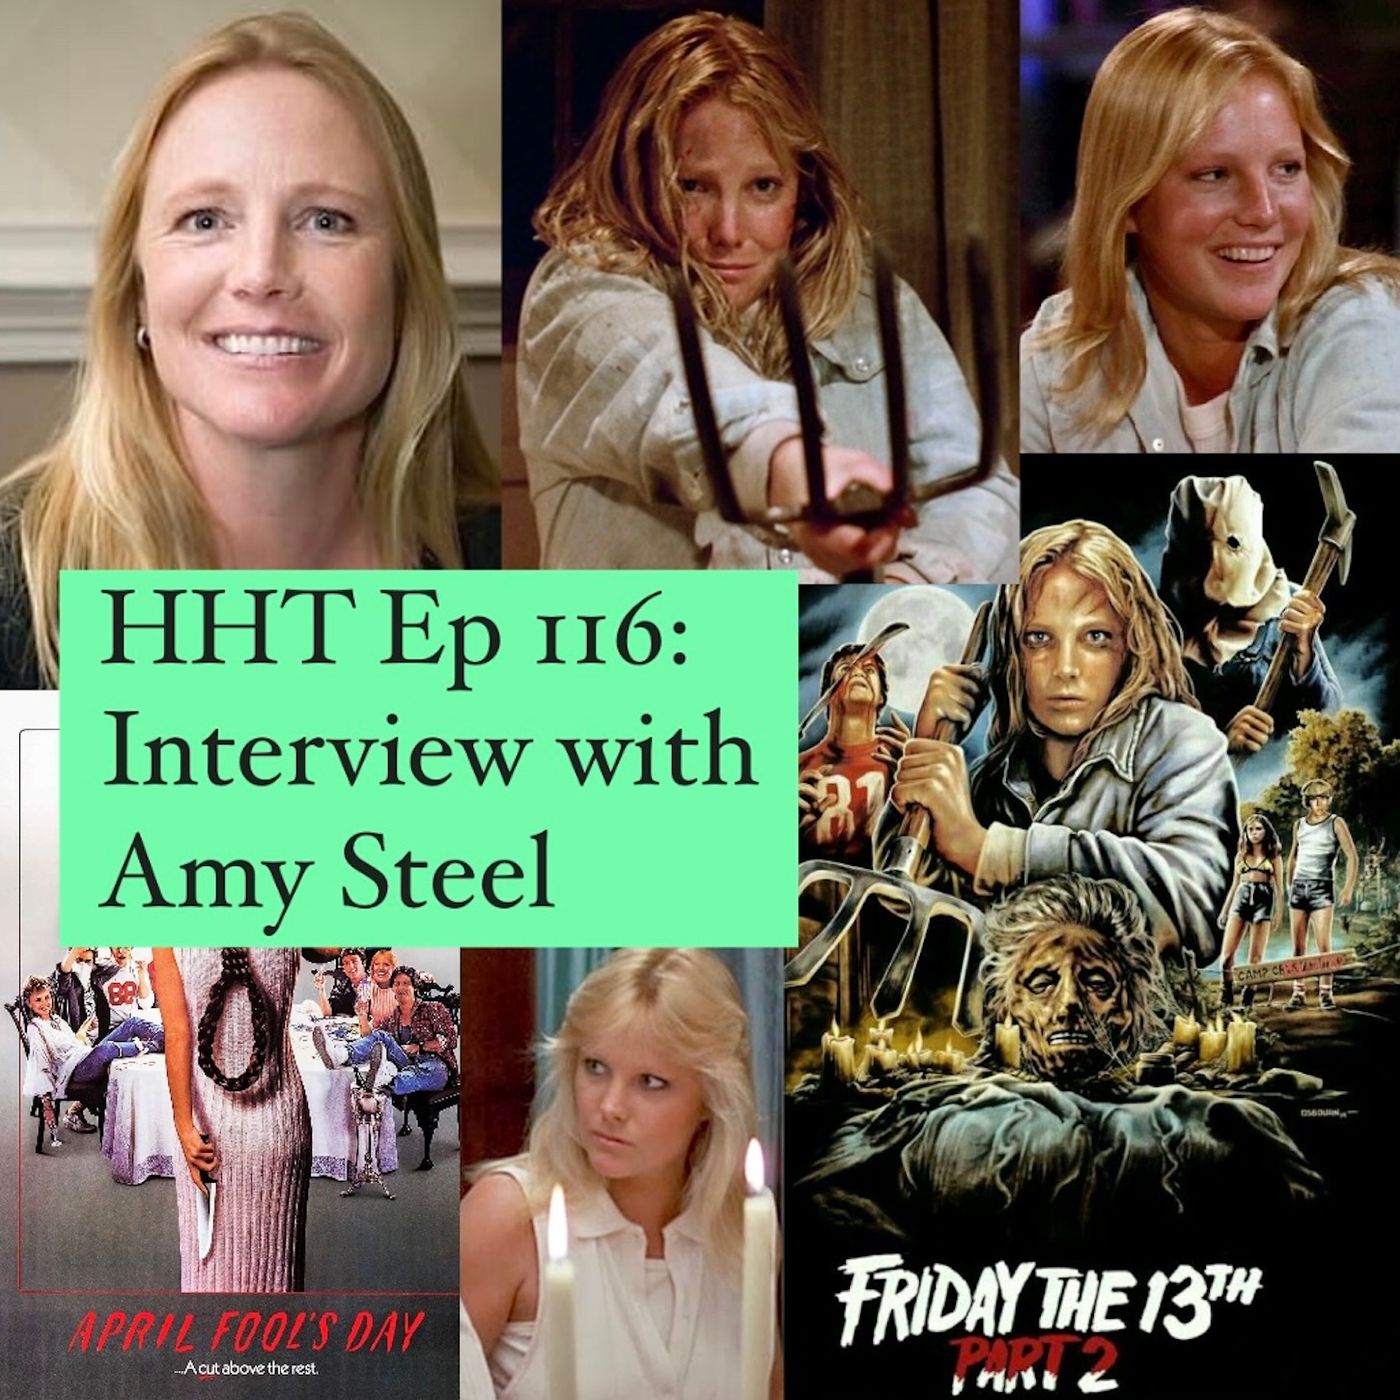 Ep 116: Interview w/Amy Steel from "F13 Pt 2" & "April Fool's Day" Image